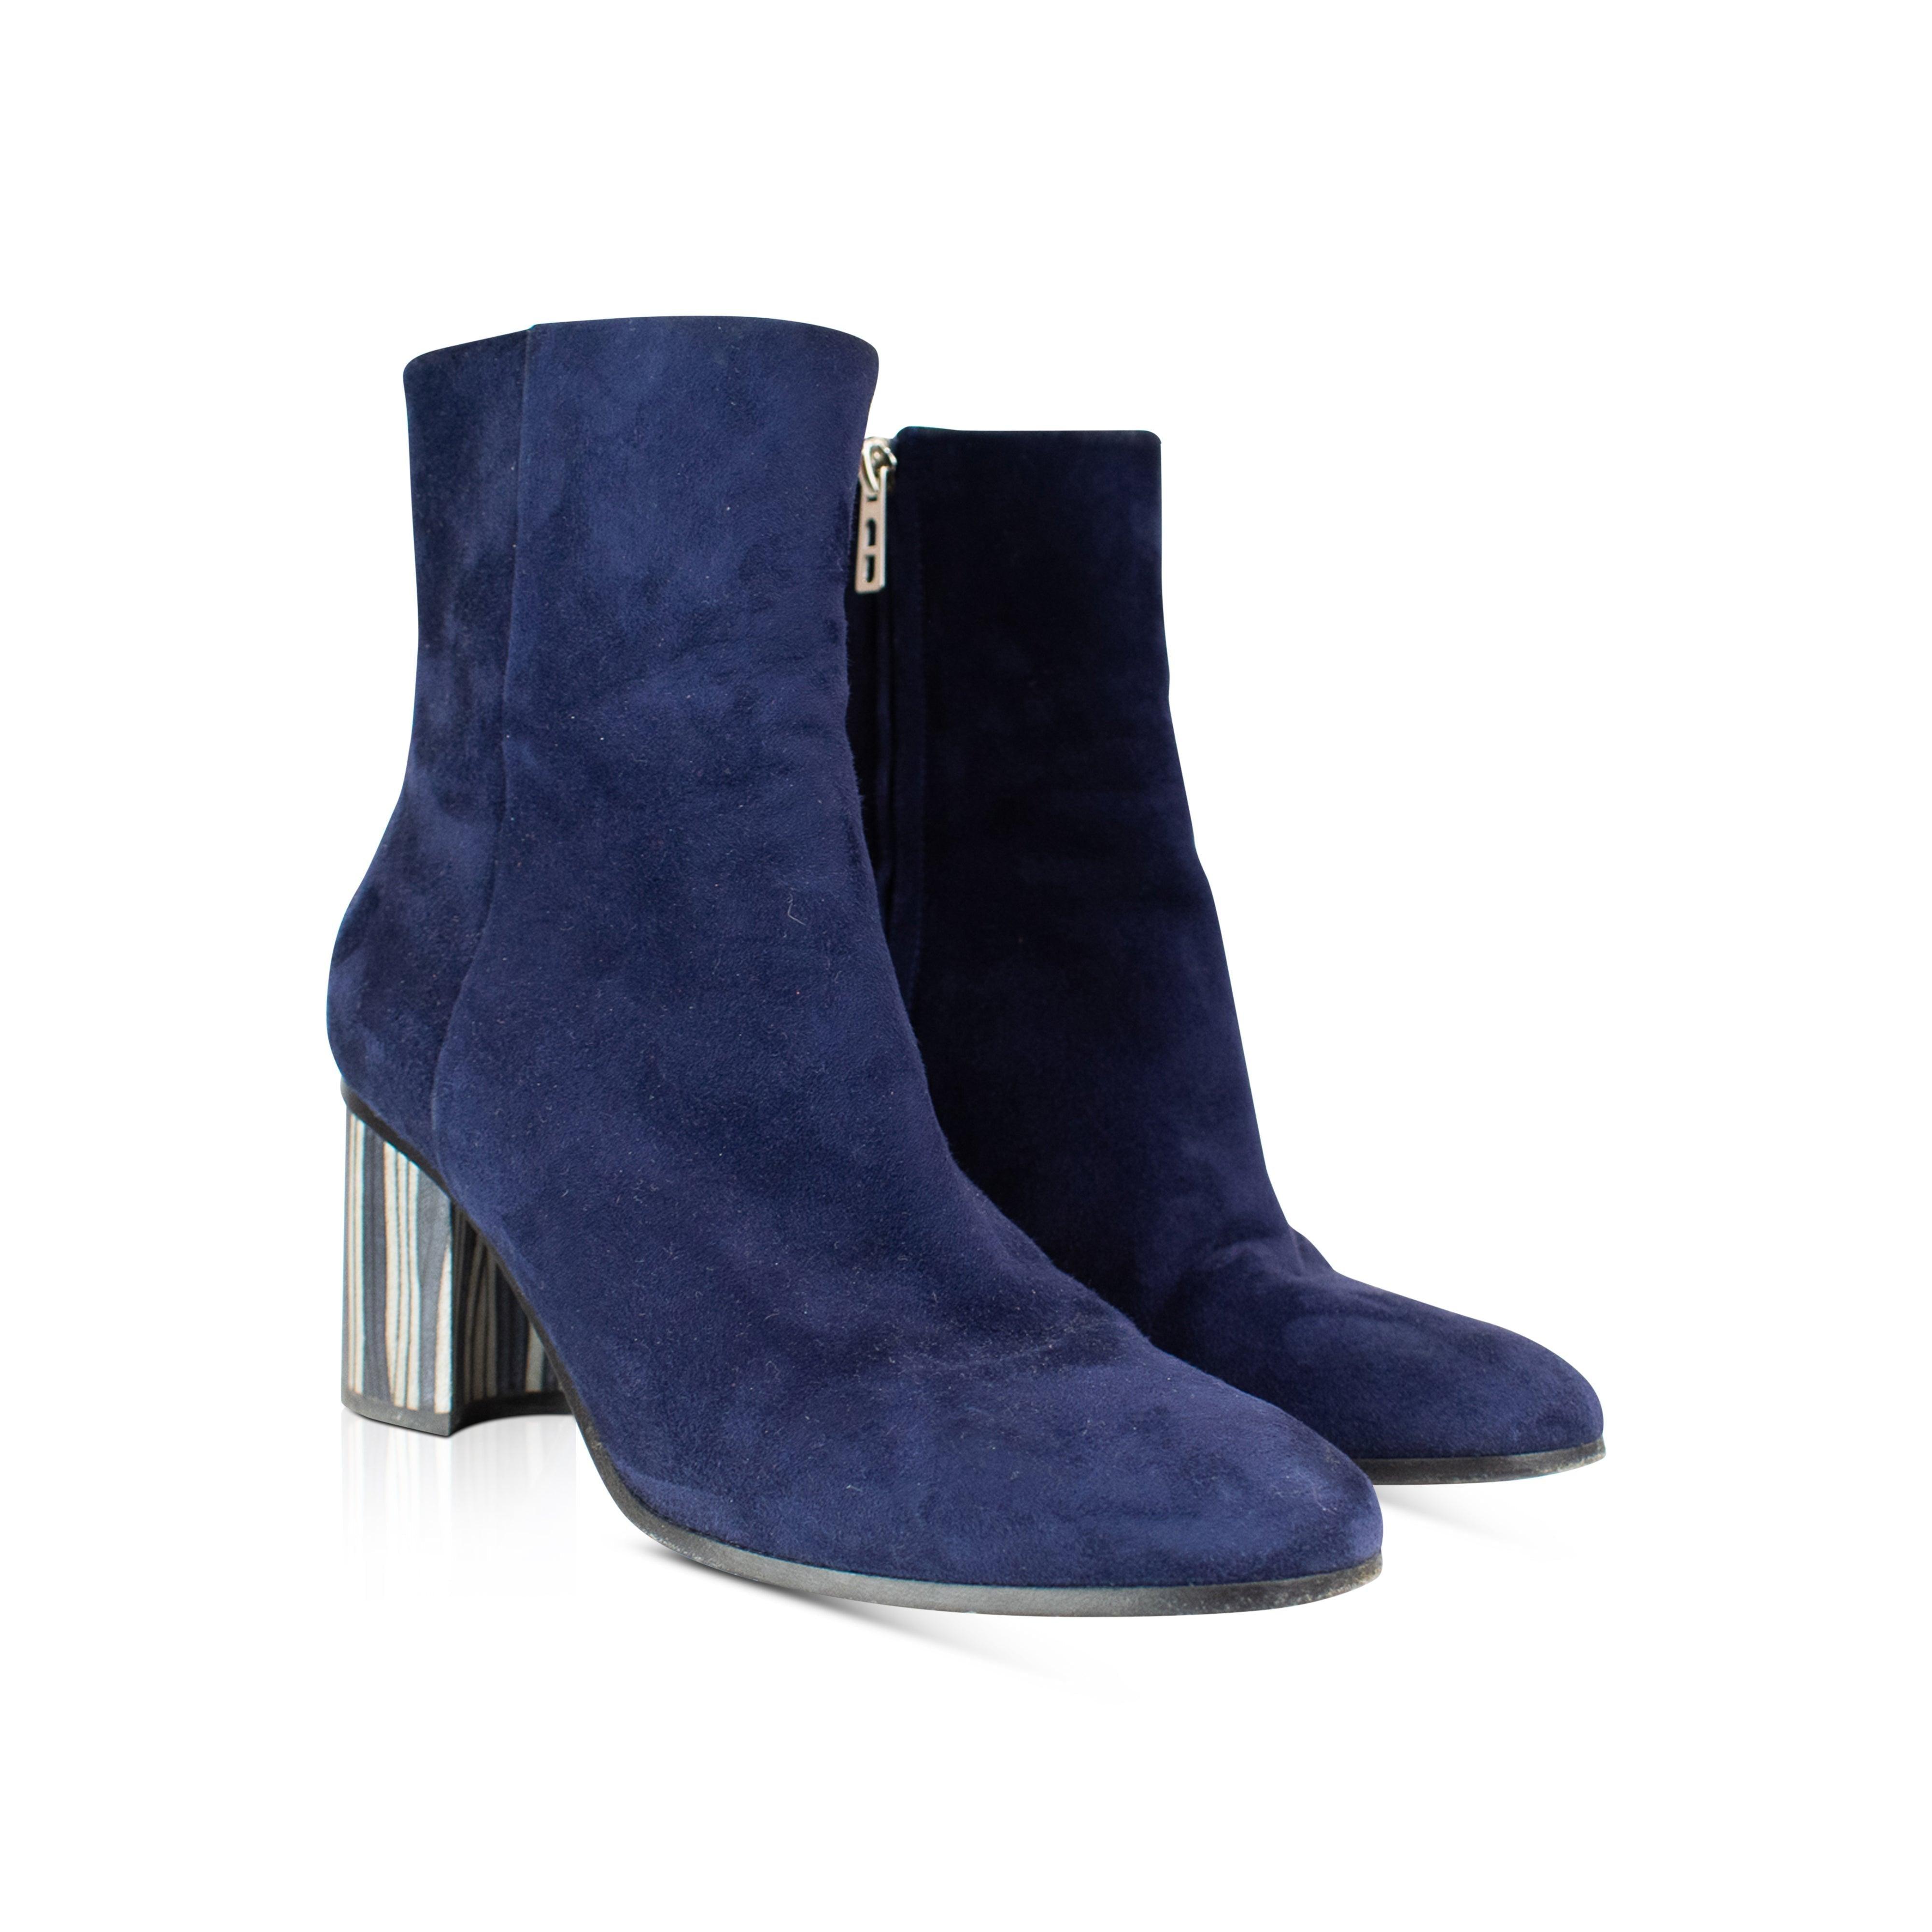 Hermes Ankle Boots - Women's 38 - Fashionably Yours